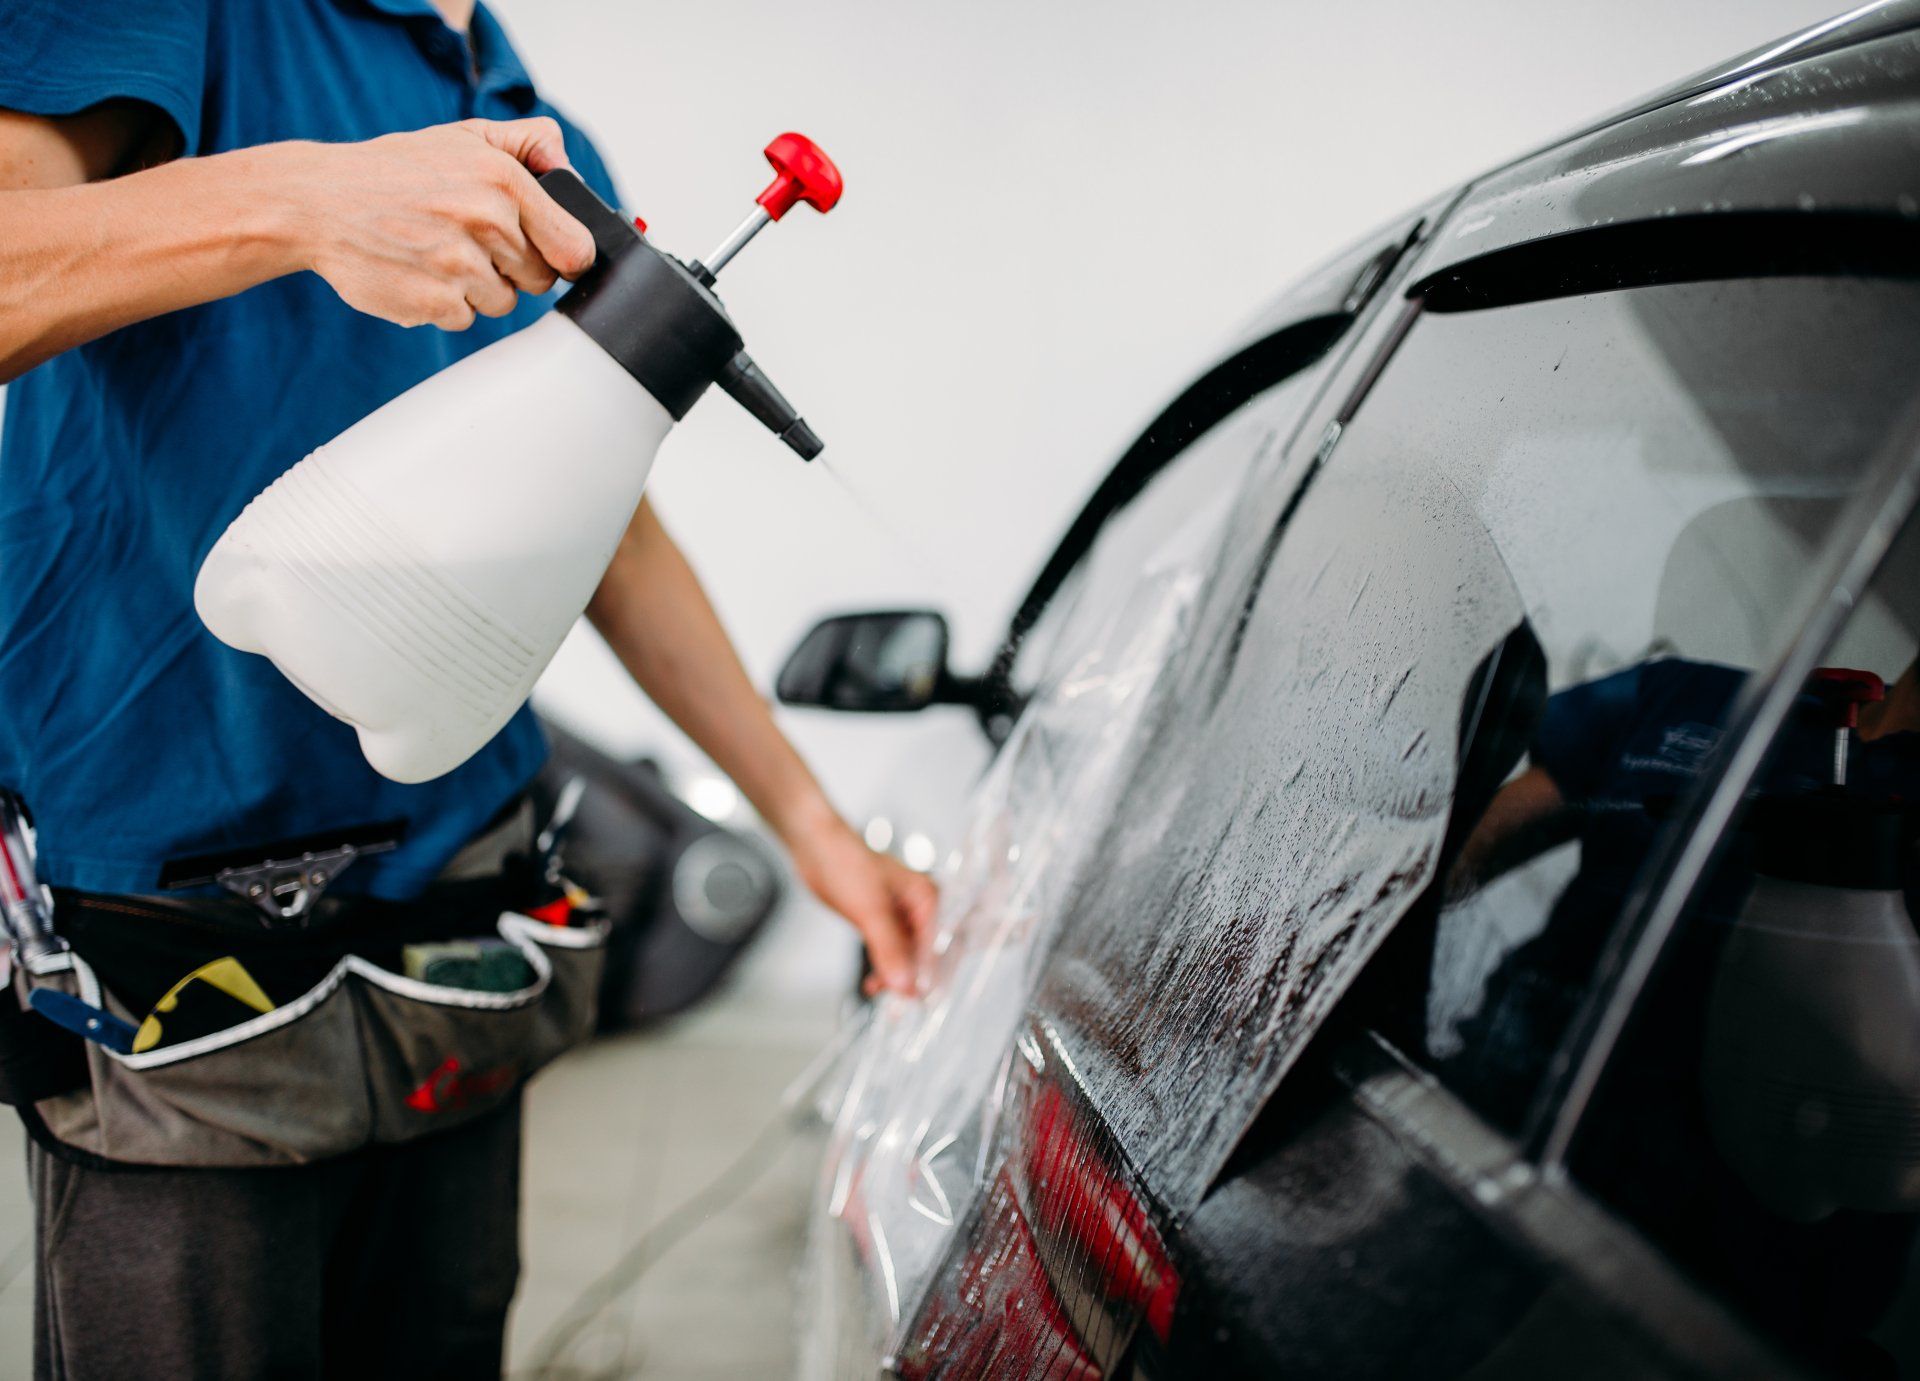 Frequently Asked Questions About Window Tinting, Window Films, and